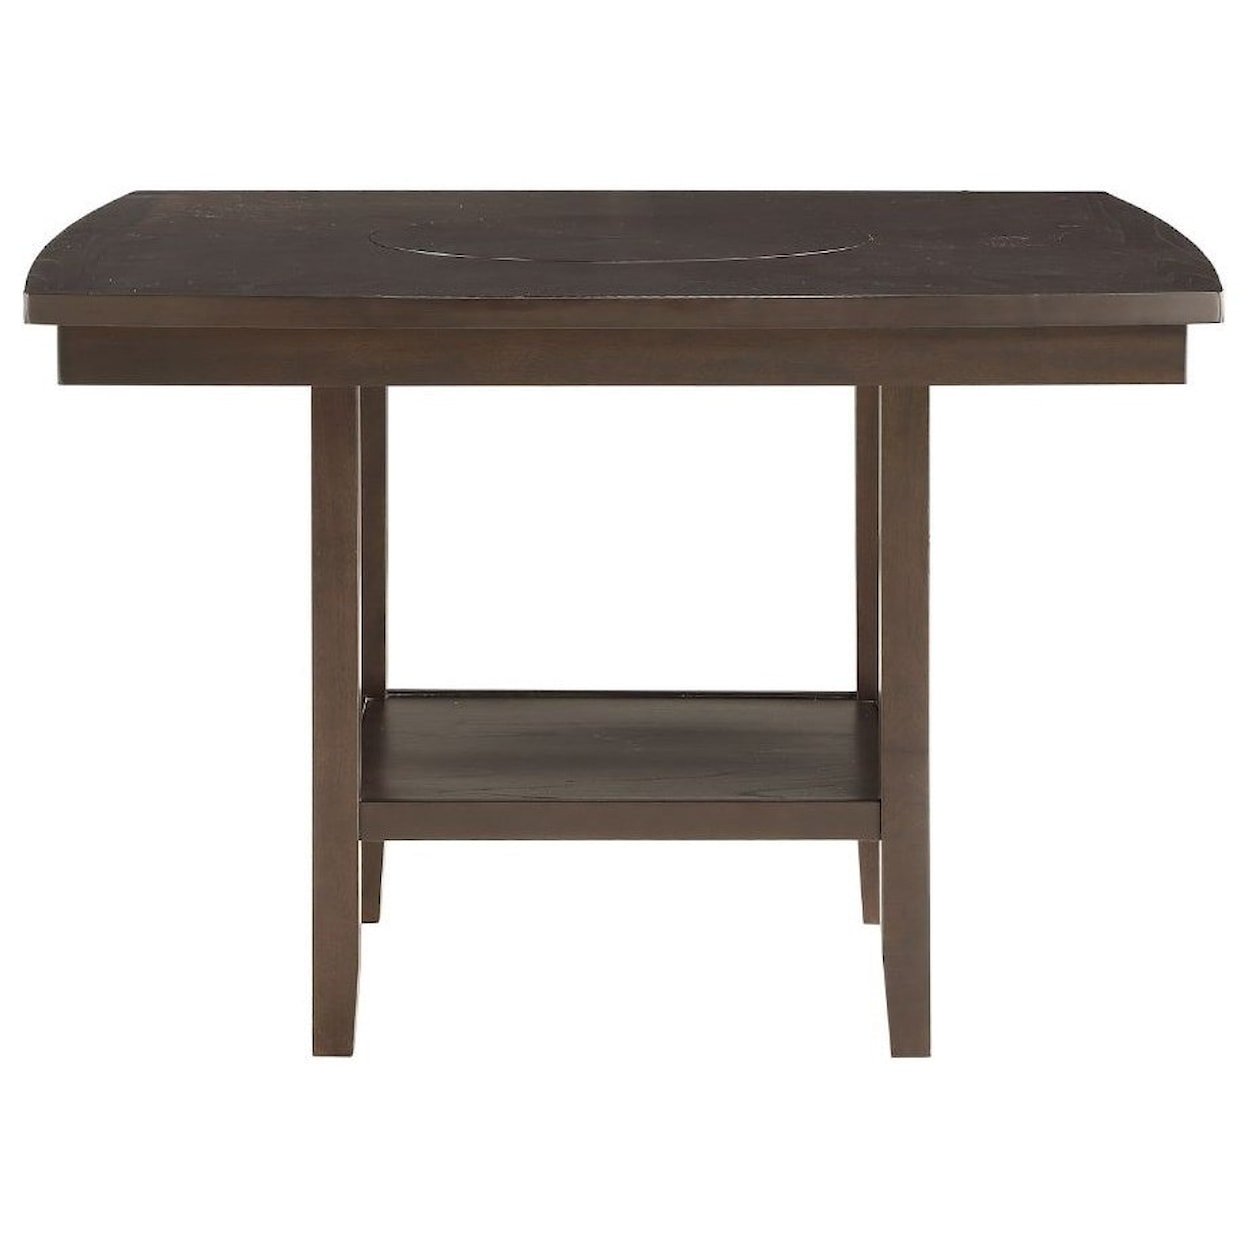 Homelegance Balin Counter Height Table with Lazy Susan